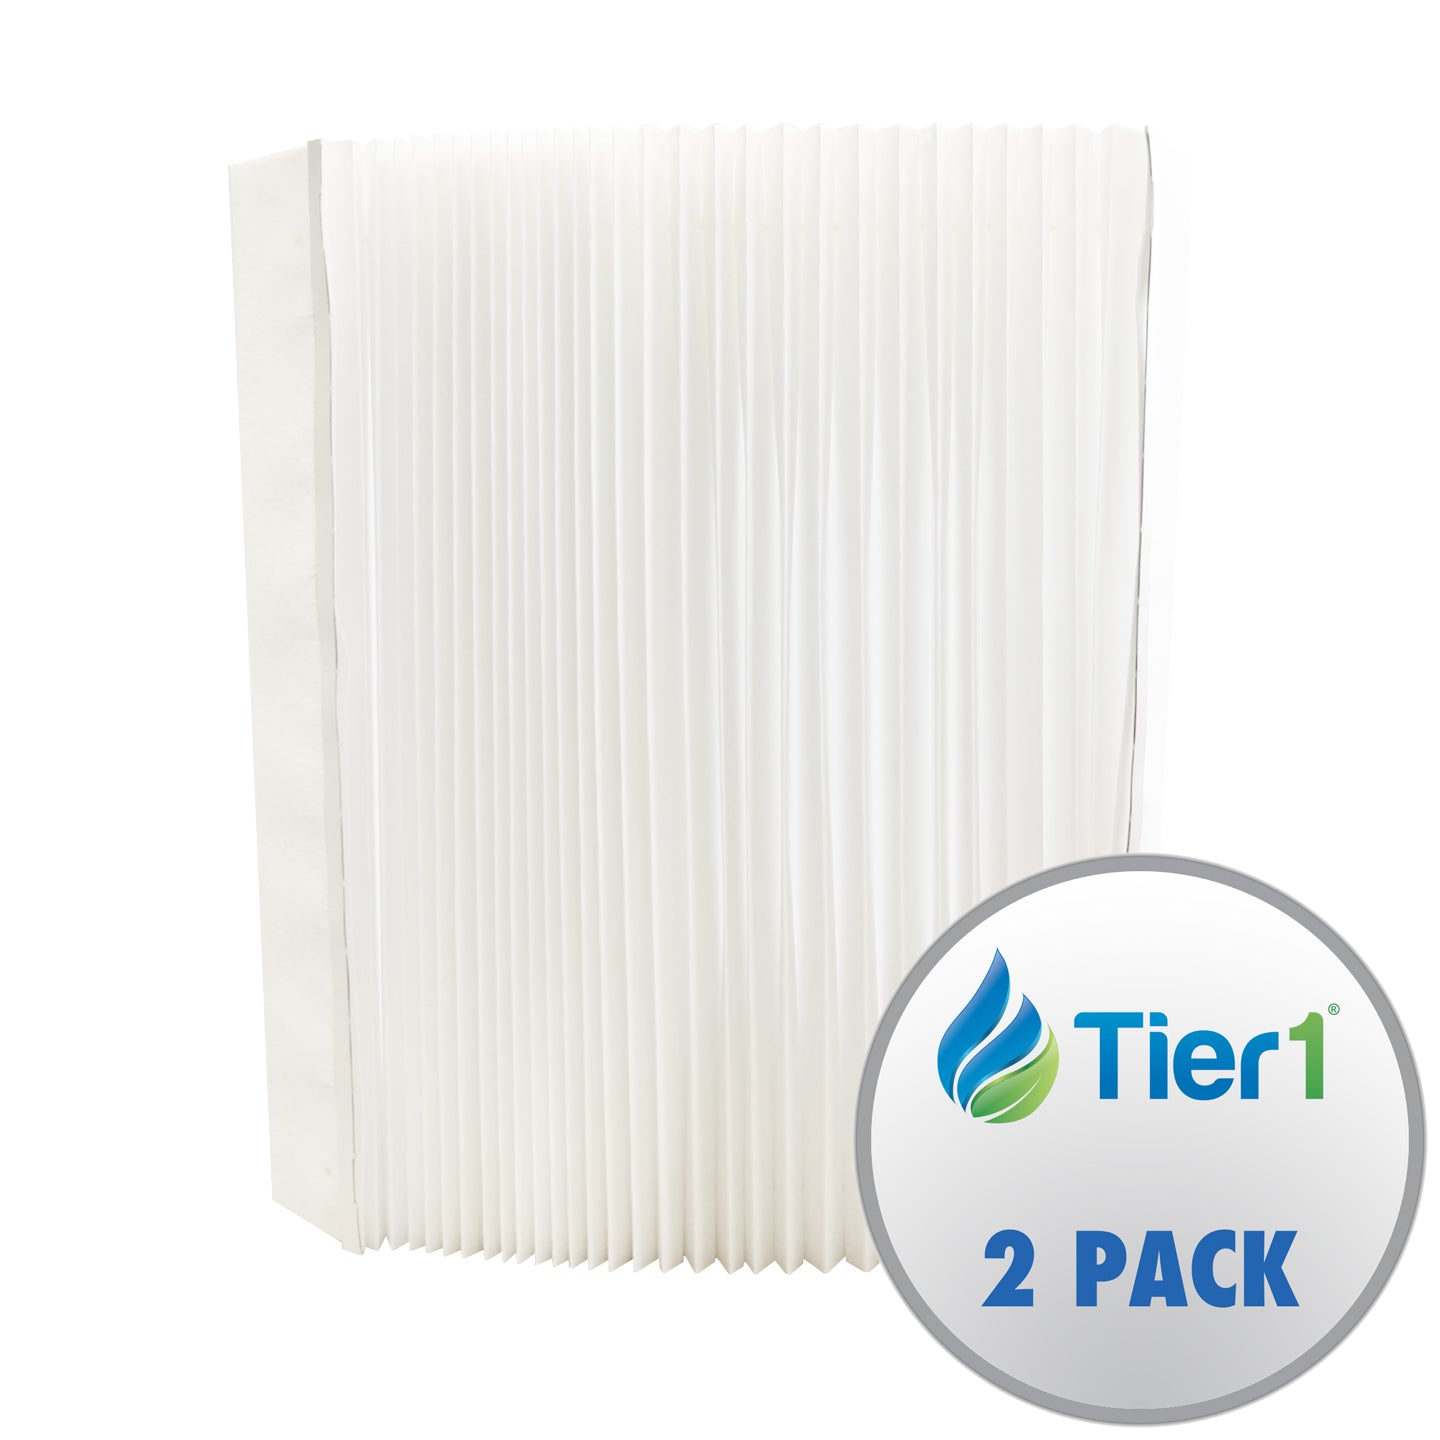 Air Filter 201 Aprilaire Comparable Replacement Filter by Tier1 (2-Pack)